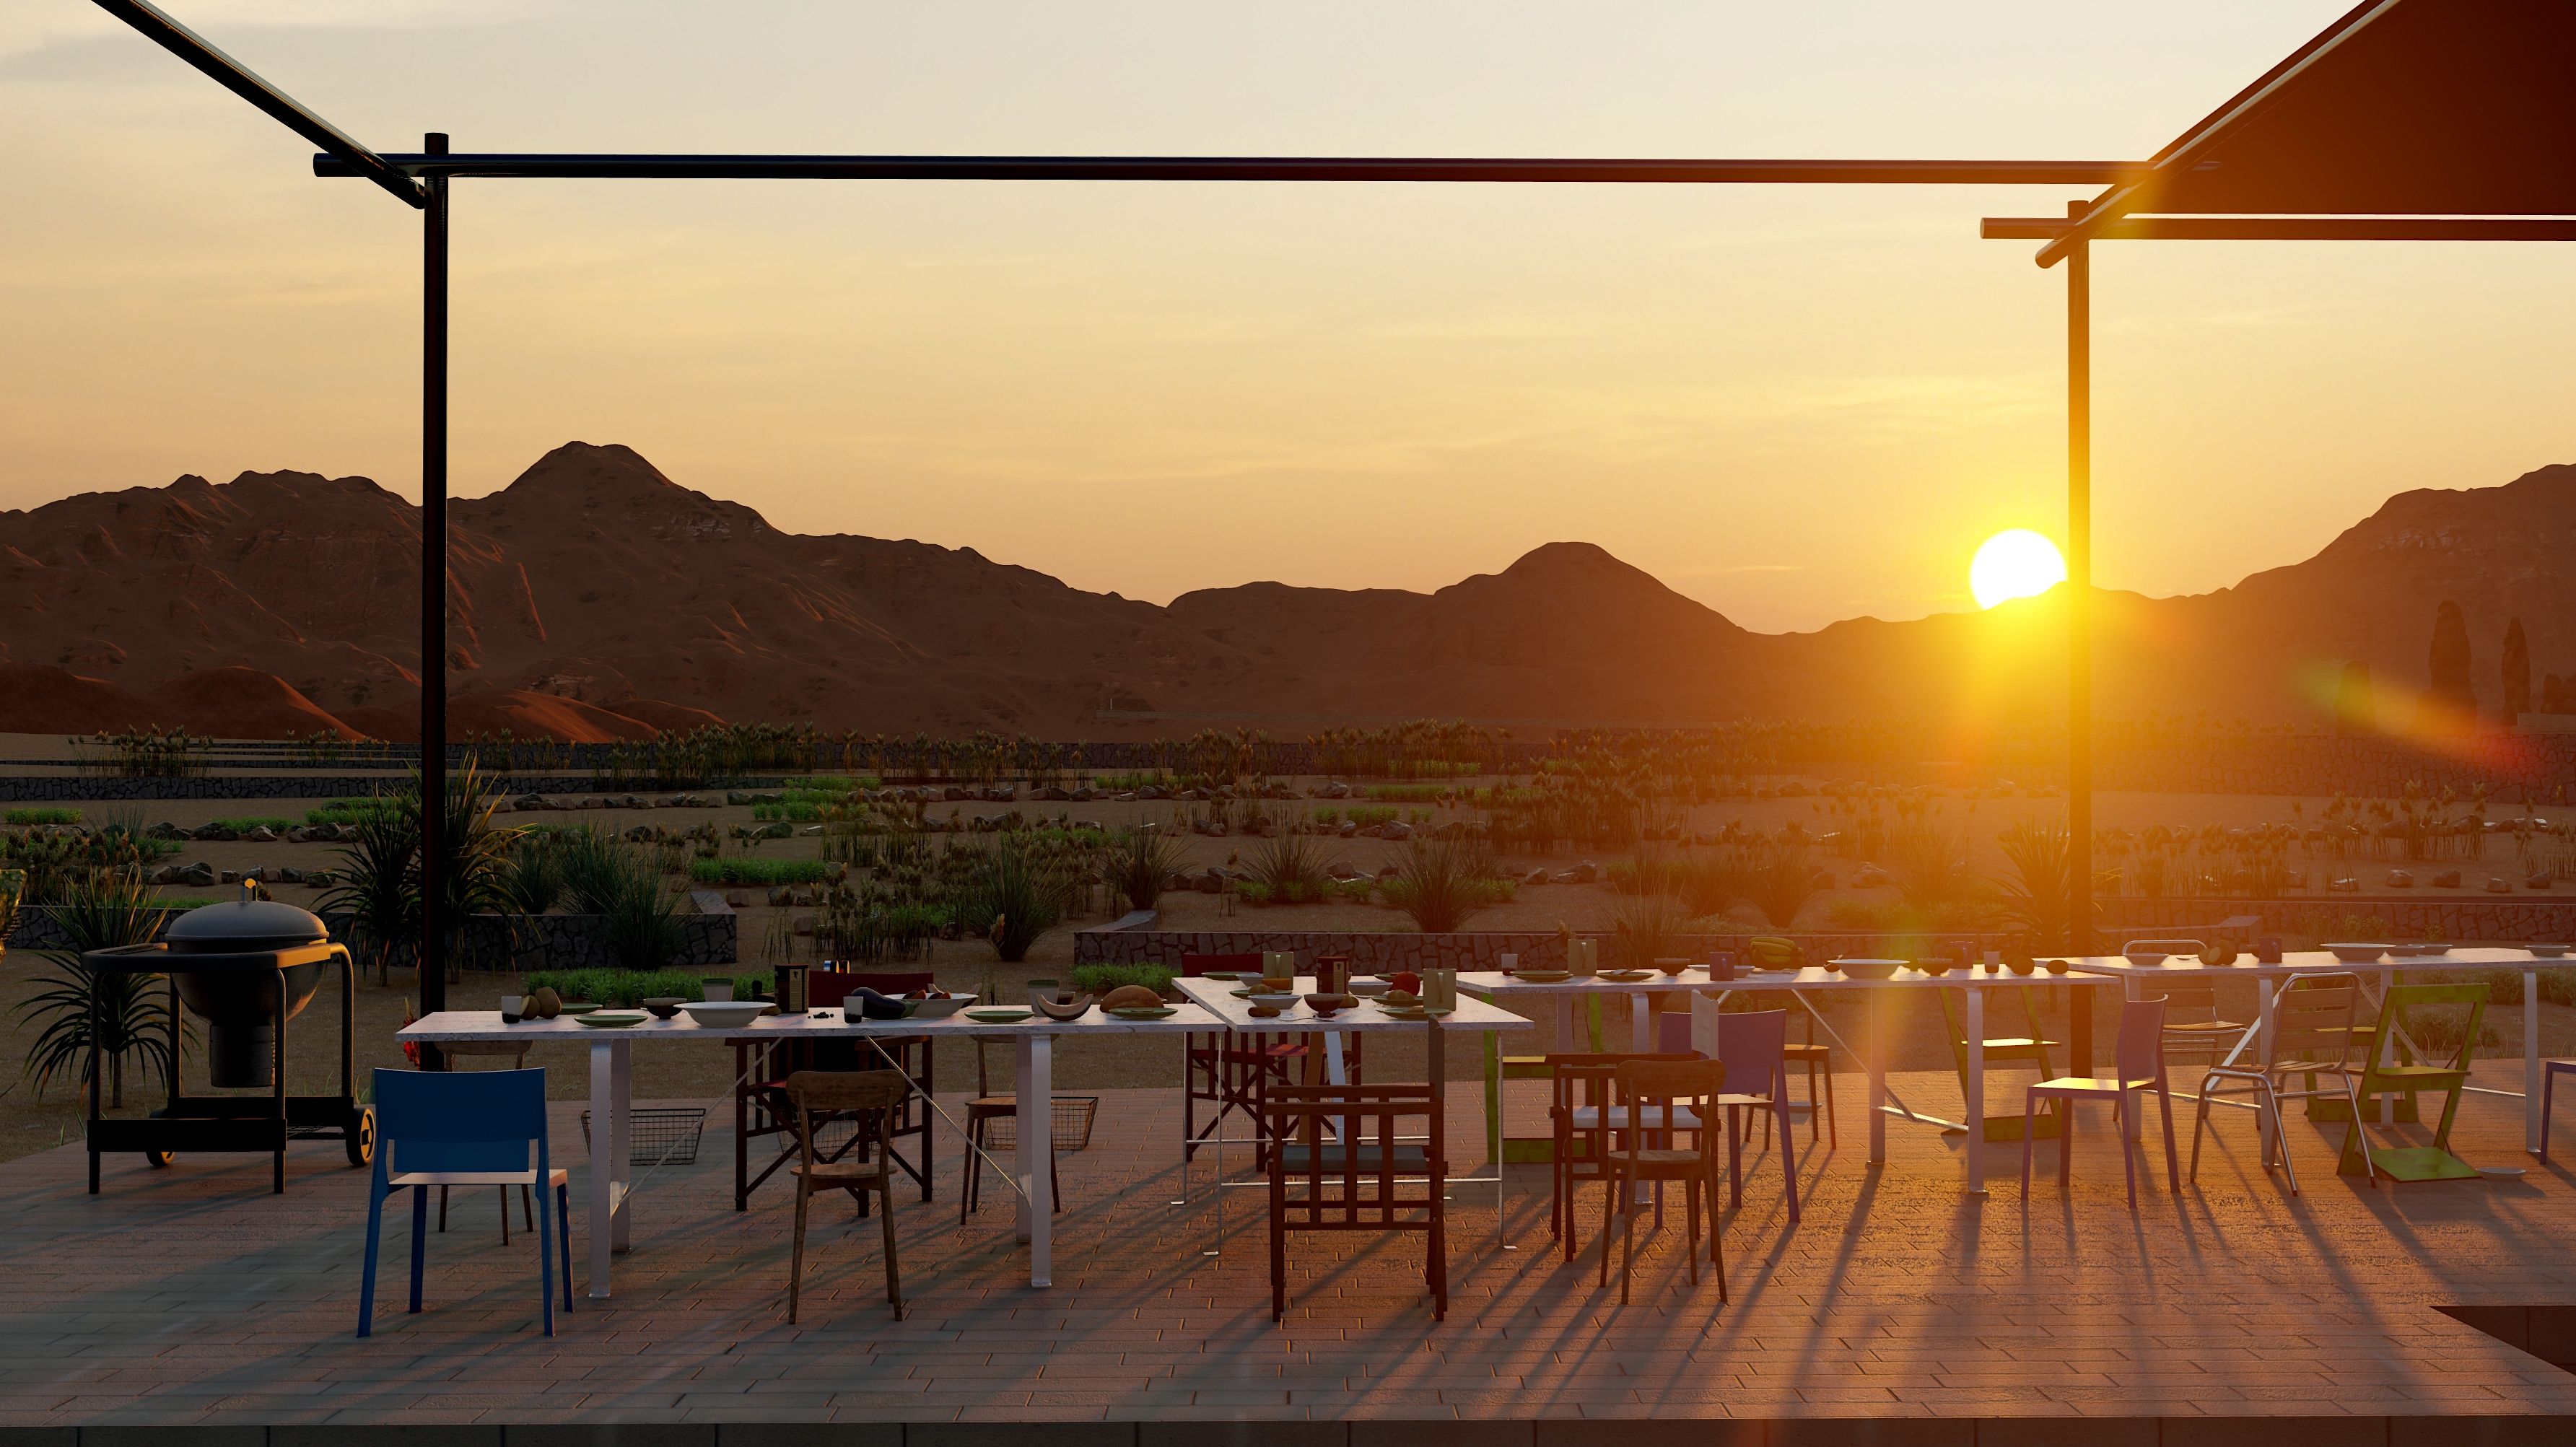 Photograph of tables and chairs on a raised outdoor area, with the sun setting behind low mountains in the background